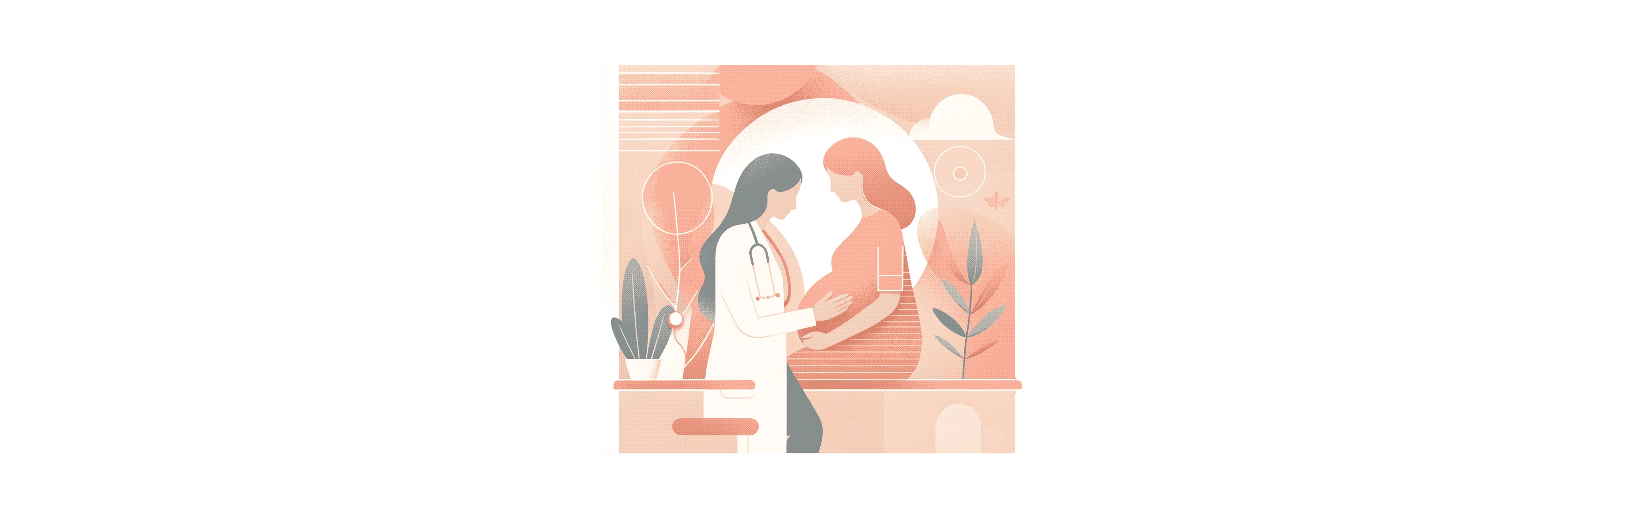 Illustration of a pregnant woman being examined by a an obstetrician to raise awareness on preeclampsia, emphasising prenatal care and maternal health.